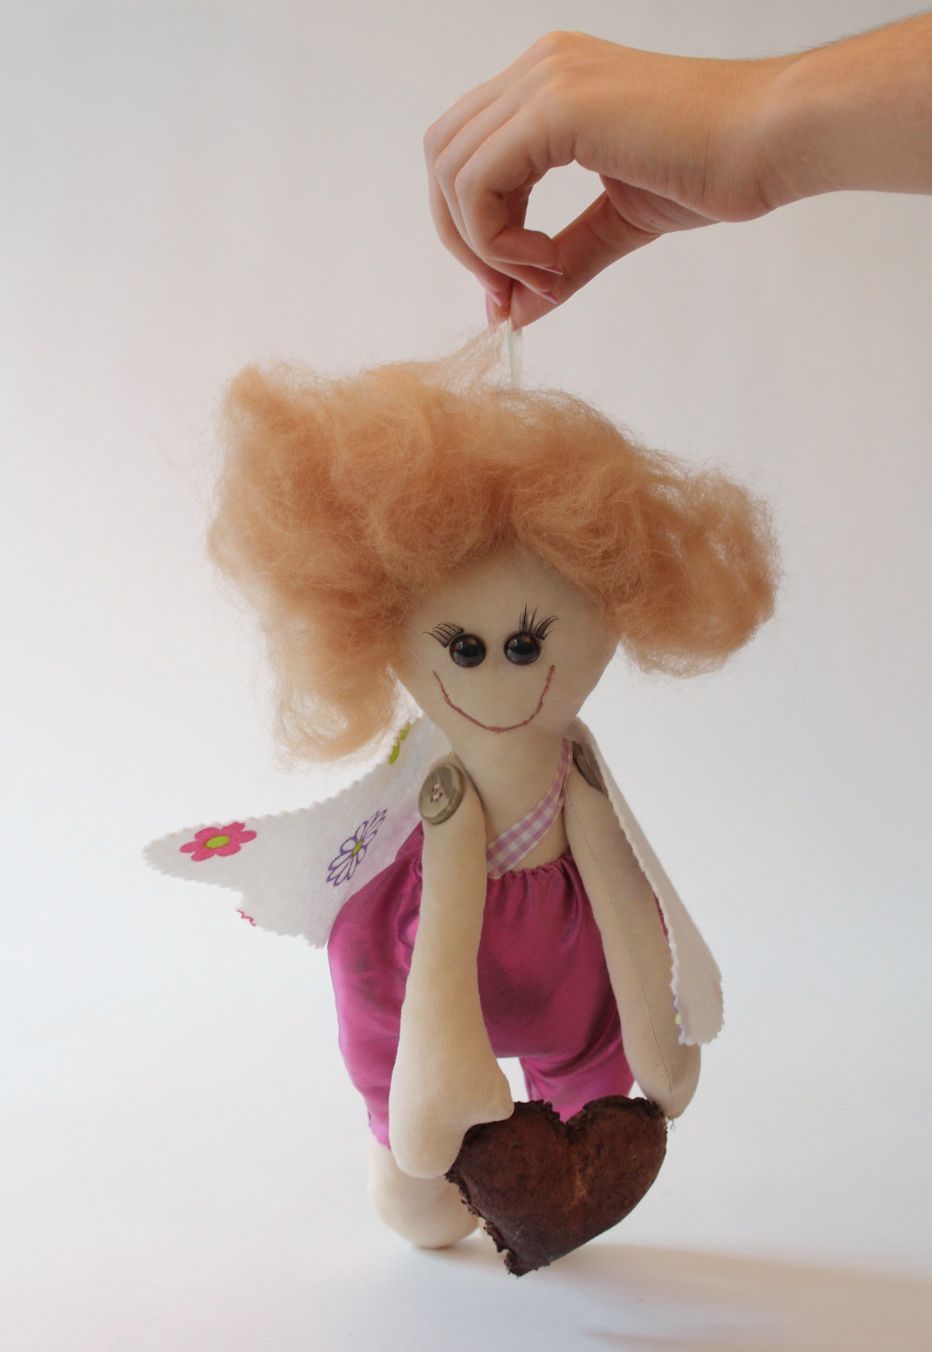 Designer toy Angel with a Heart photo 1